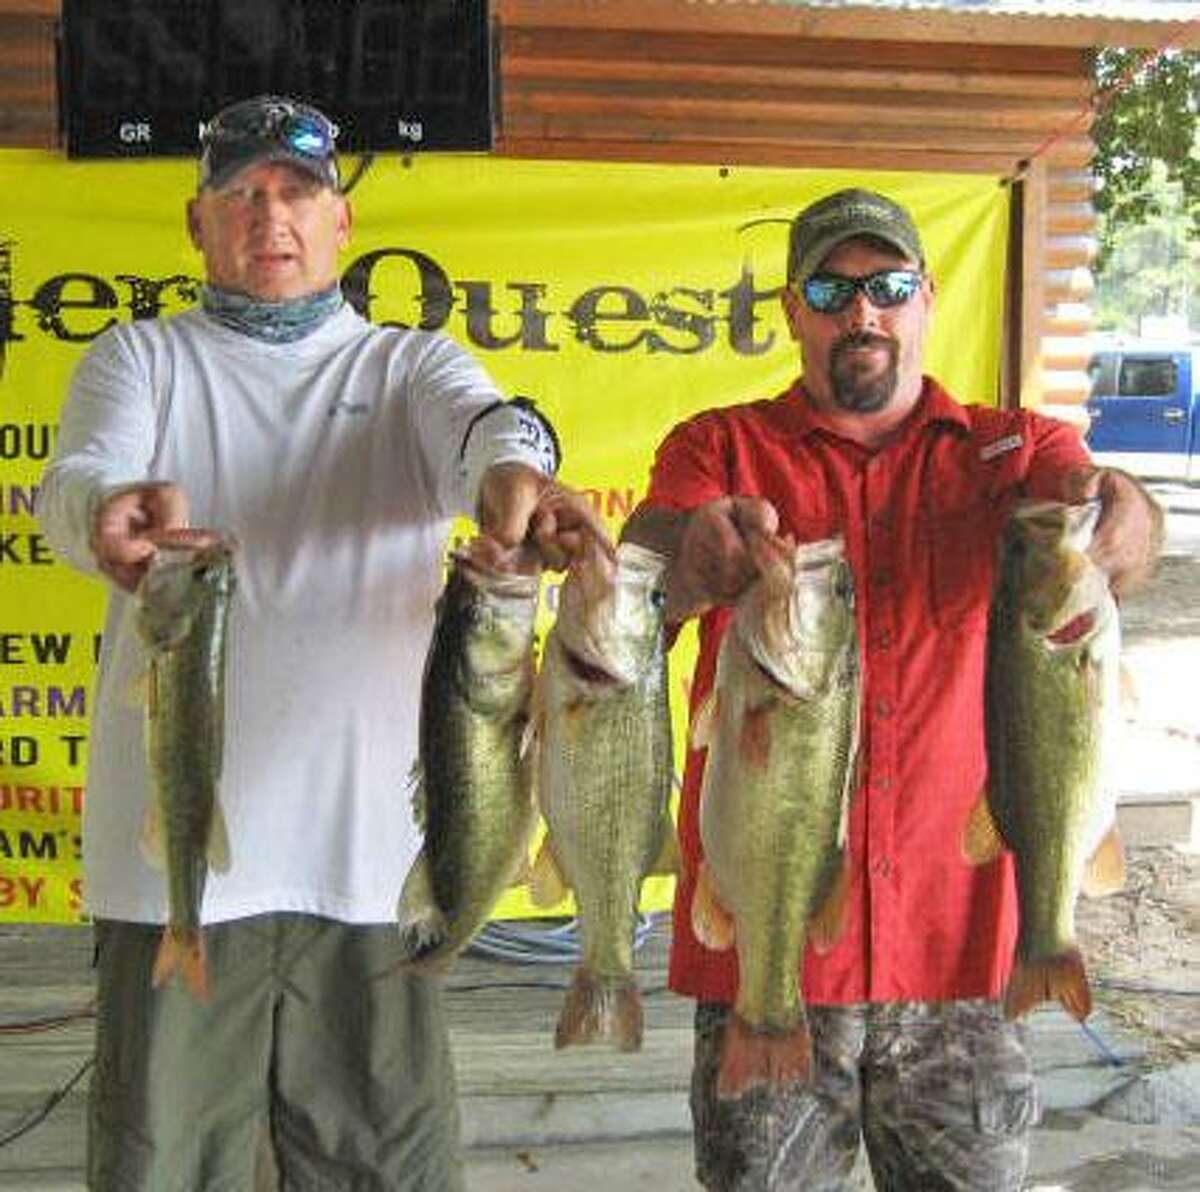 Ty Russell and Garrett Pierce came in third place in the Anglers Quest Team Tournament #8 with a stringer weight of 18.64 pounds.